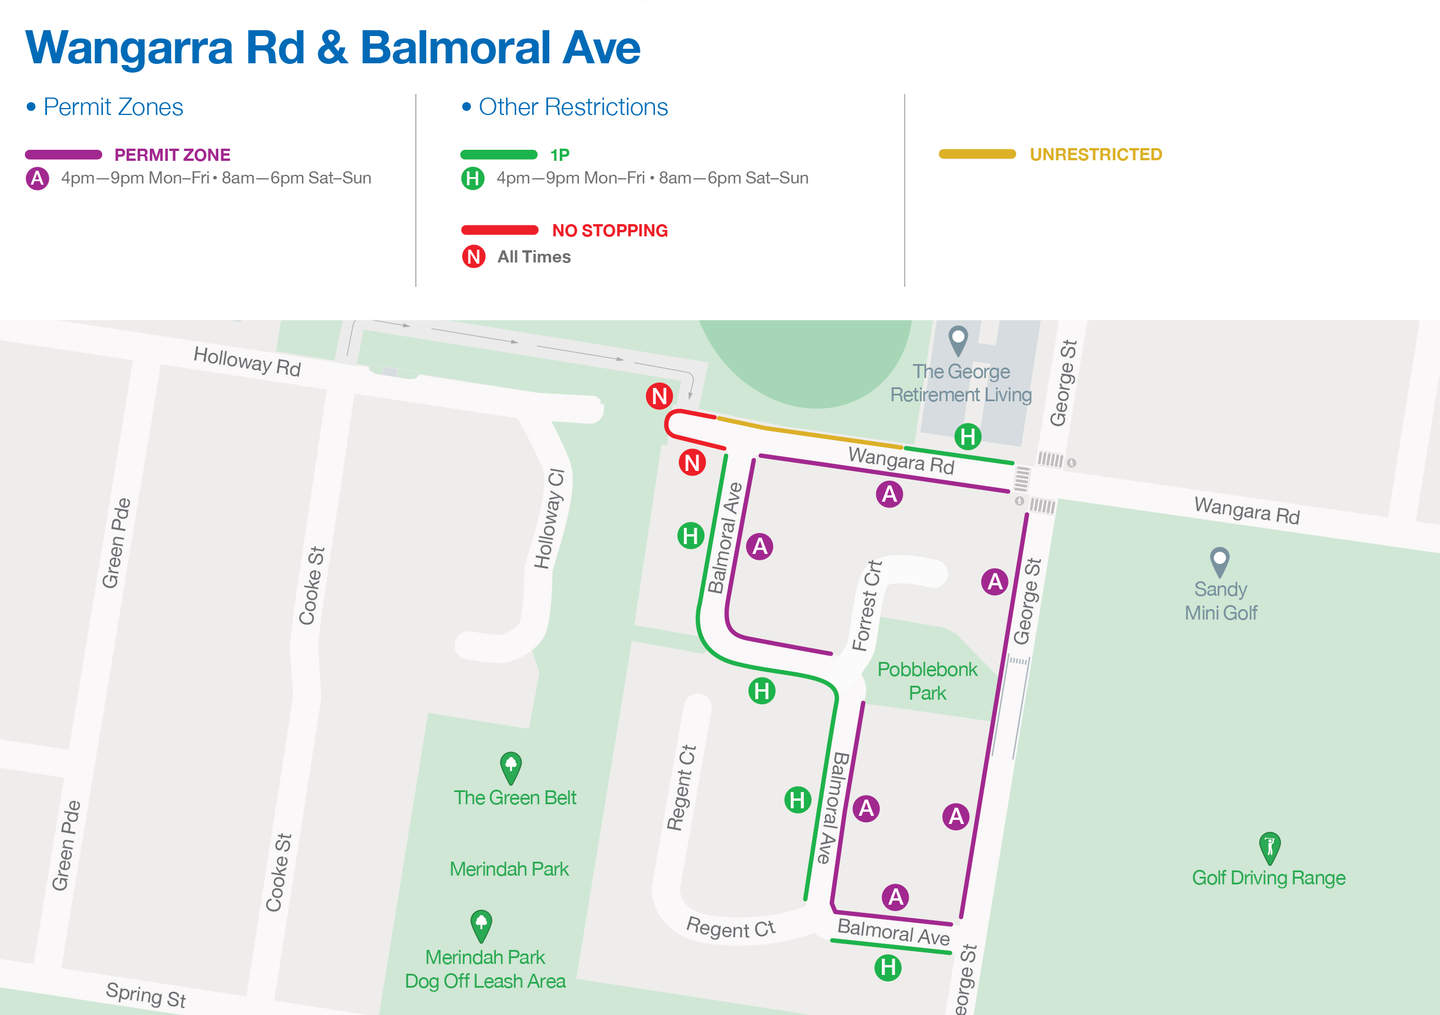 Netball Centre parking restrictions on Wangara Road and Balmoral Avenue